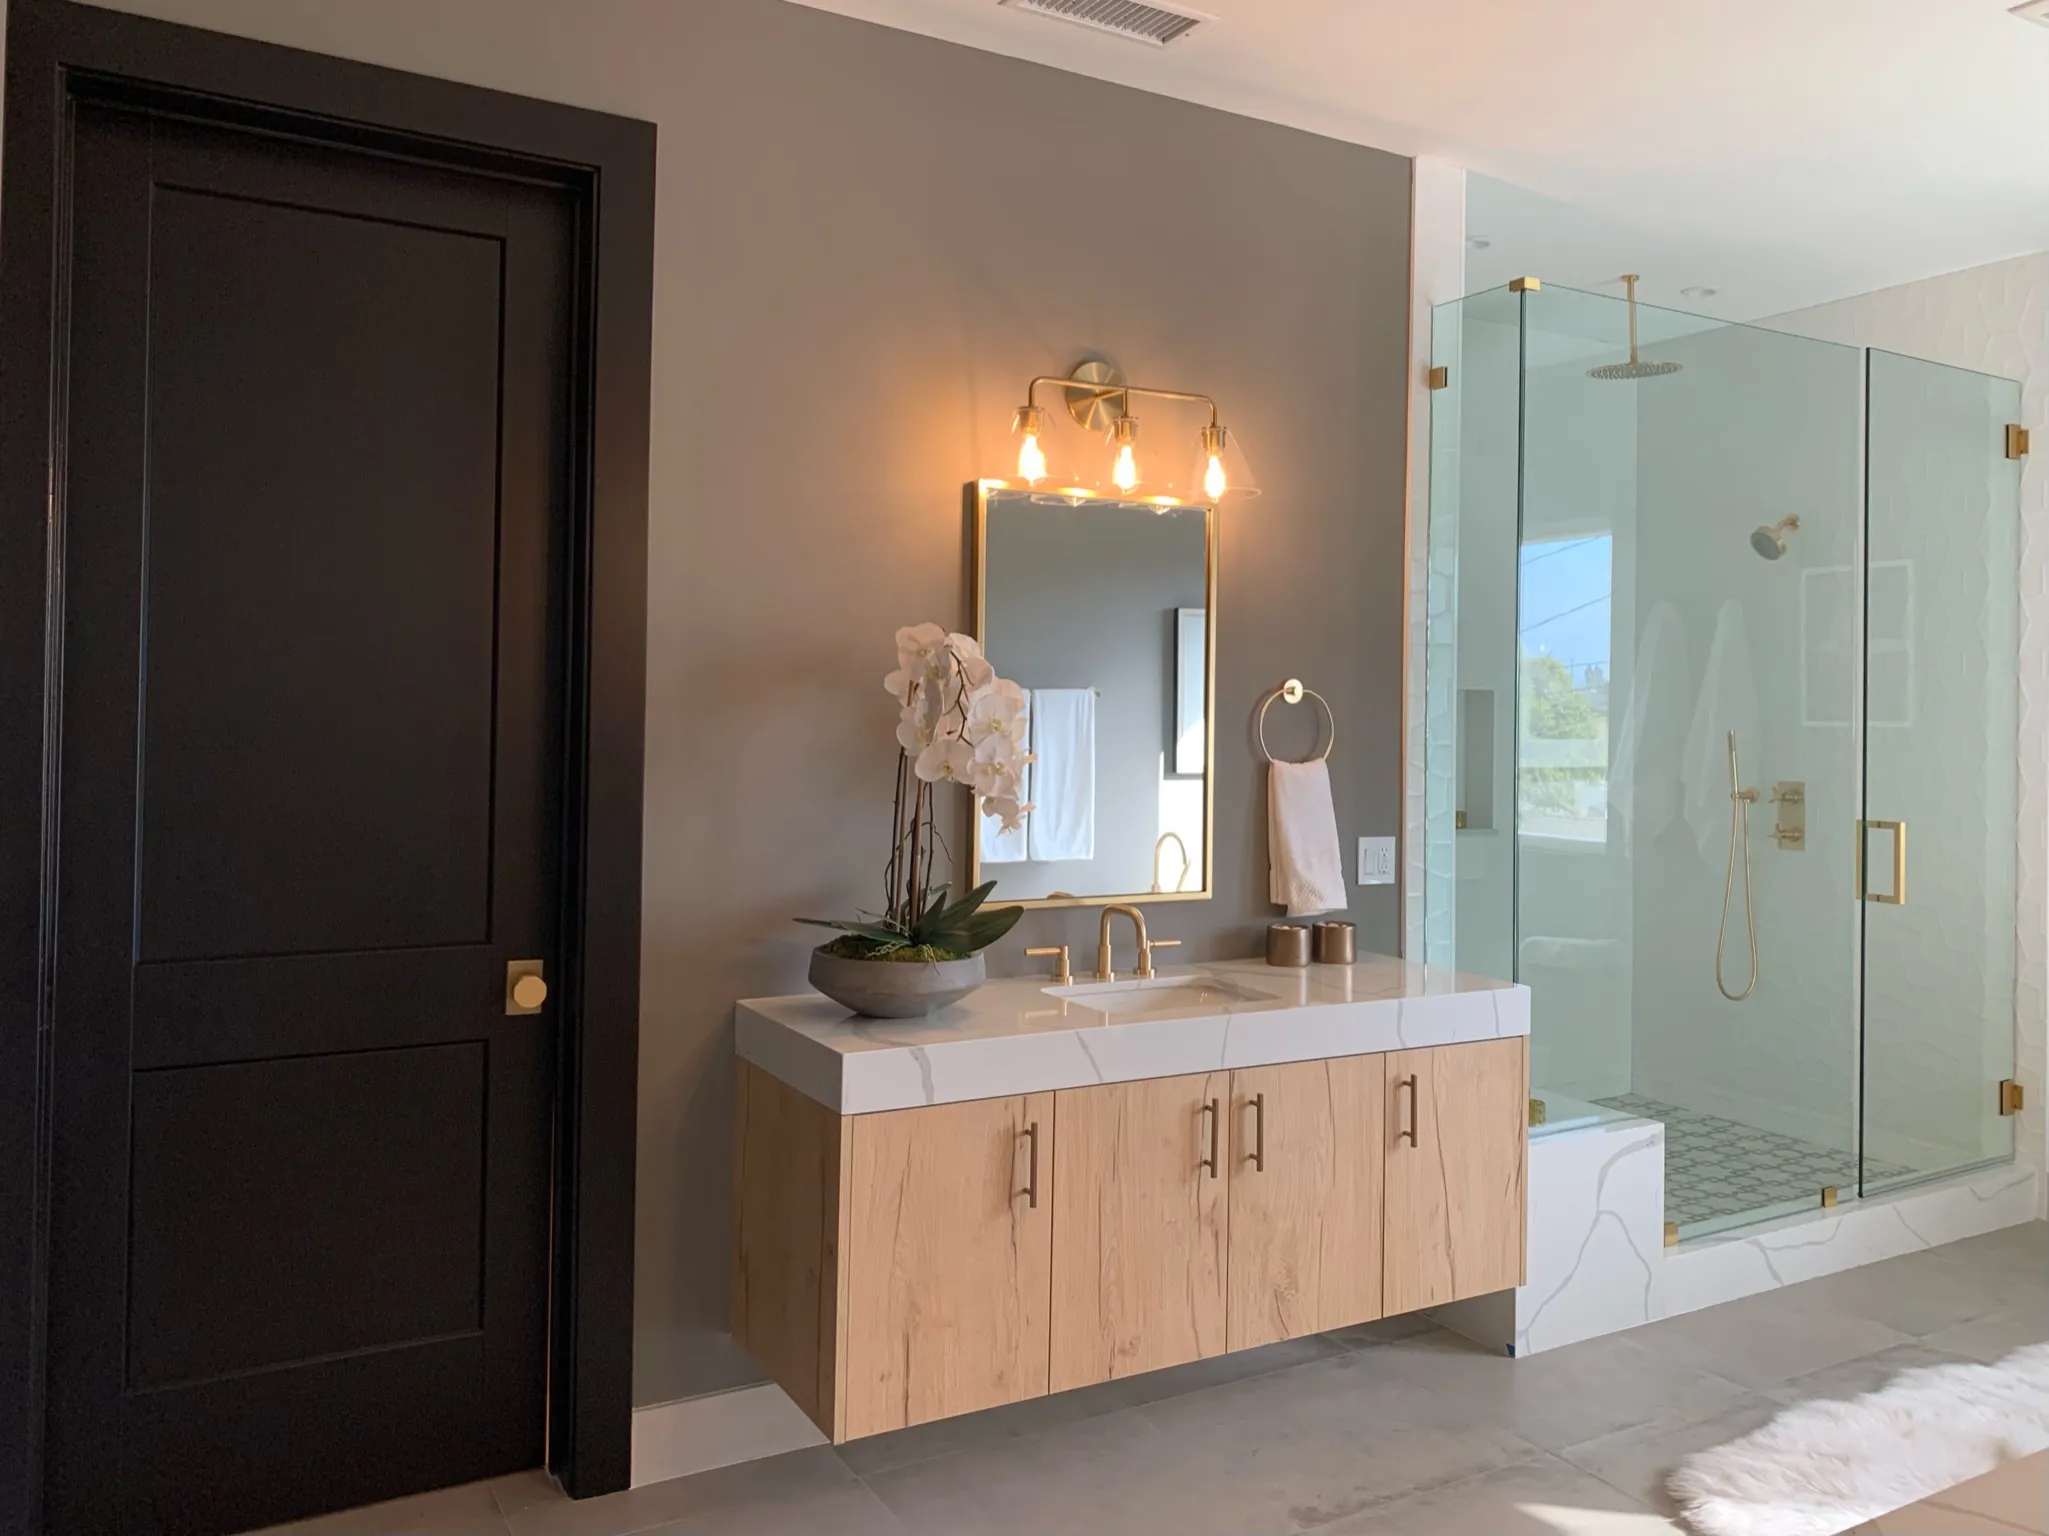 Most important components of a master bathroom. They usually features a sink, countertop, and storage, such as drawers and cabinets.